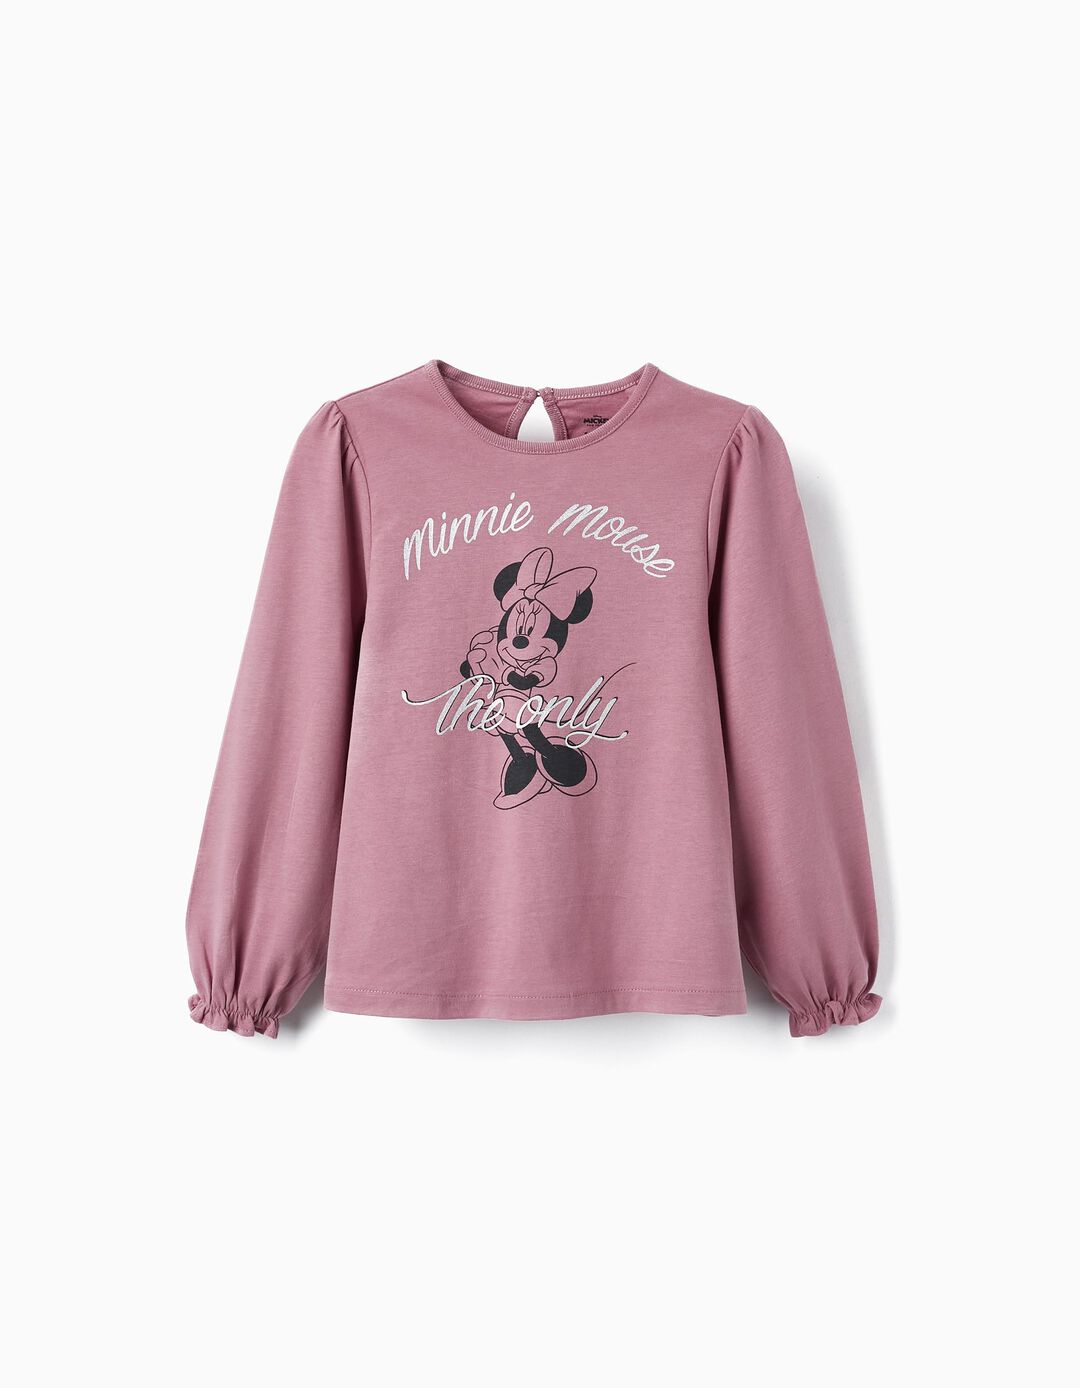 Long Sleeve T-shirt in Cotton for Girls 'Minnie', Pink